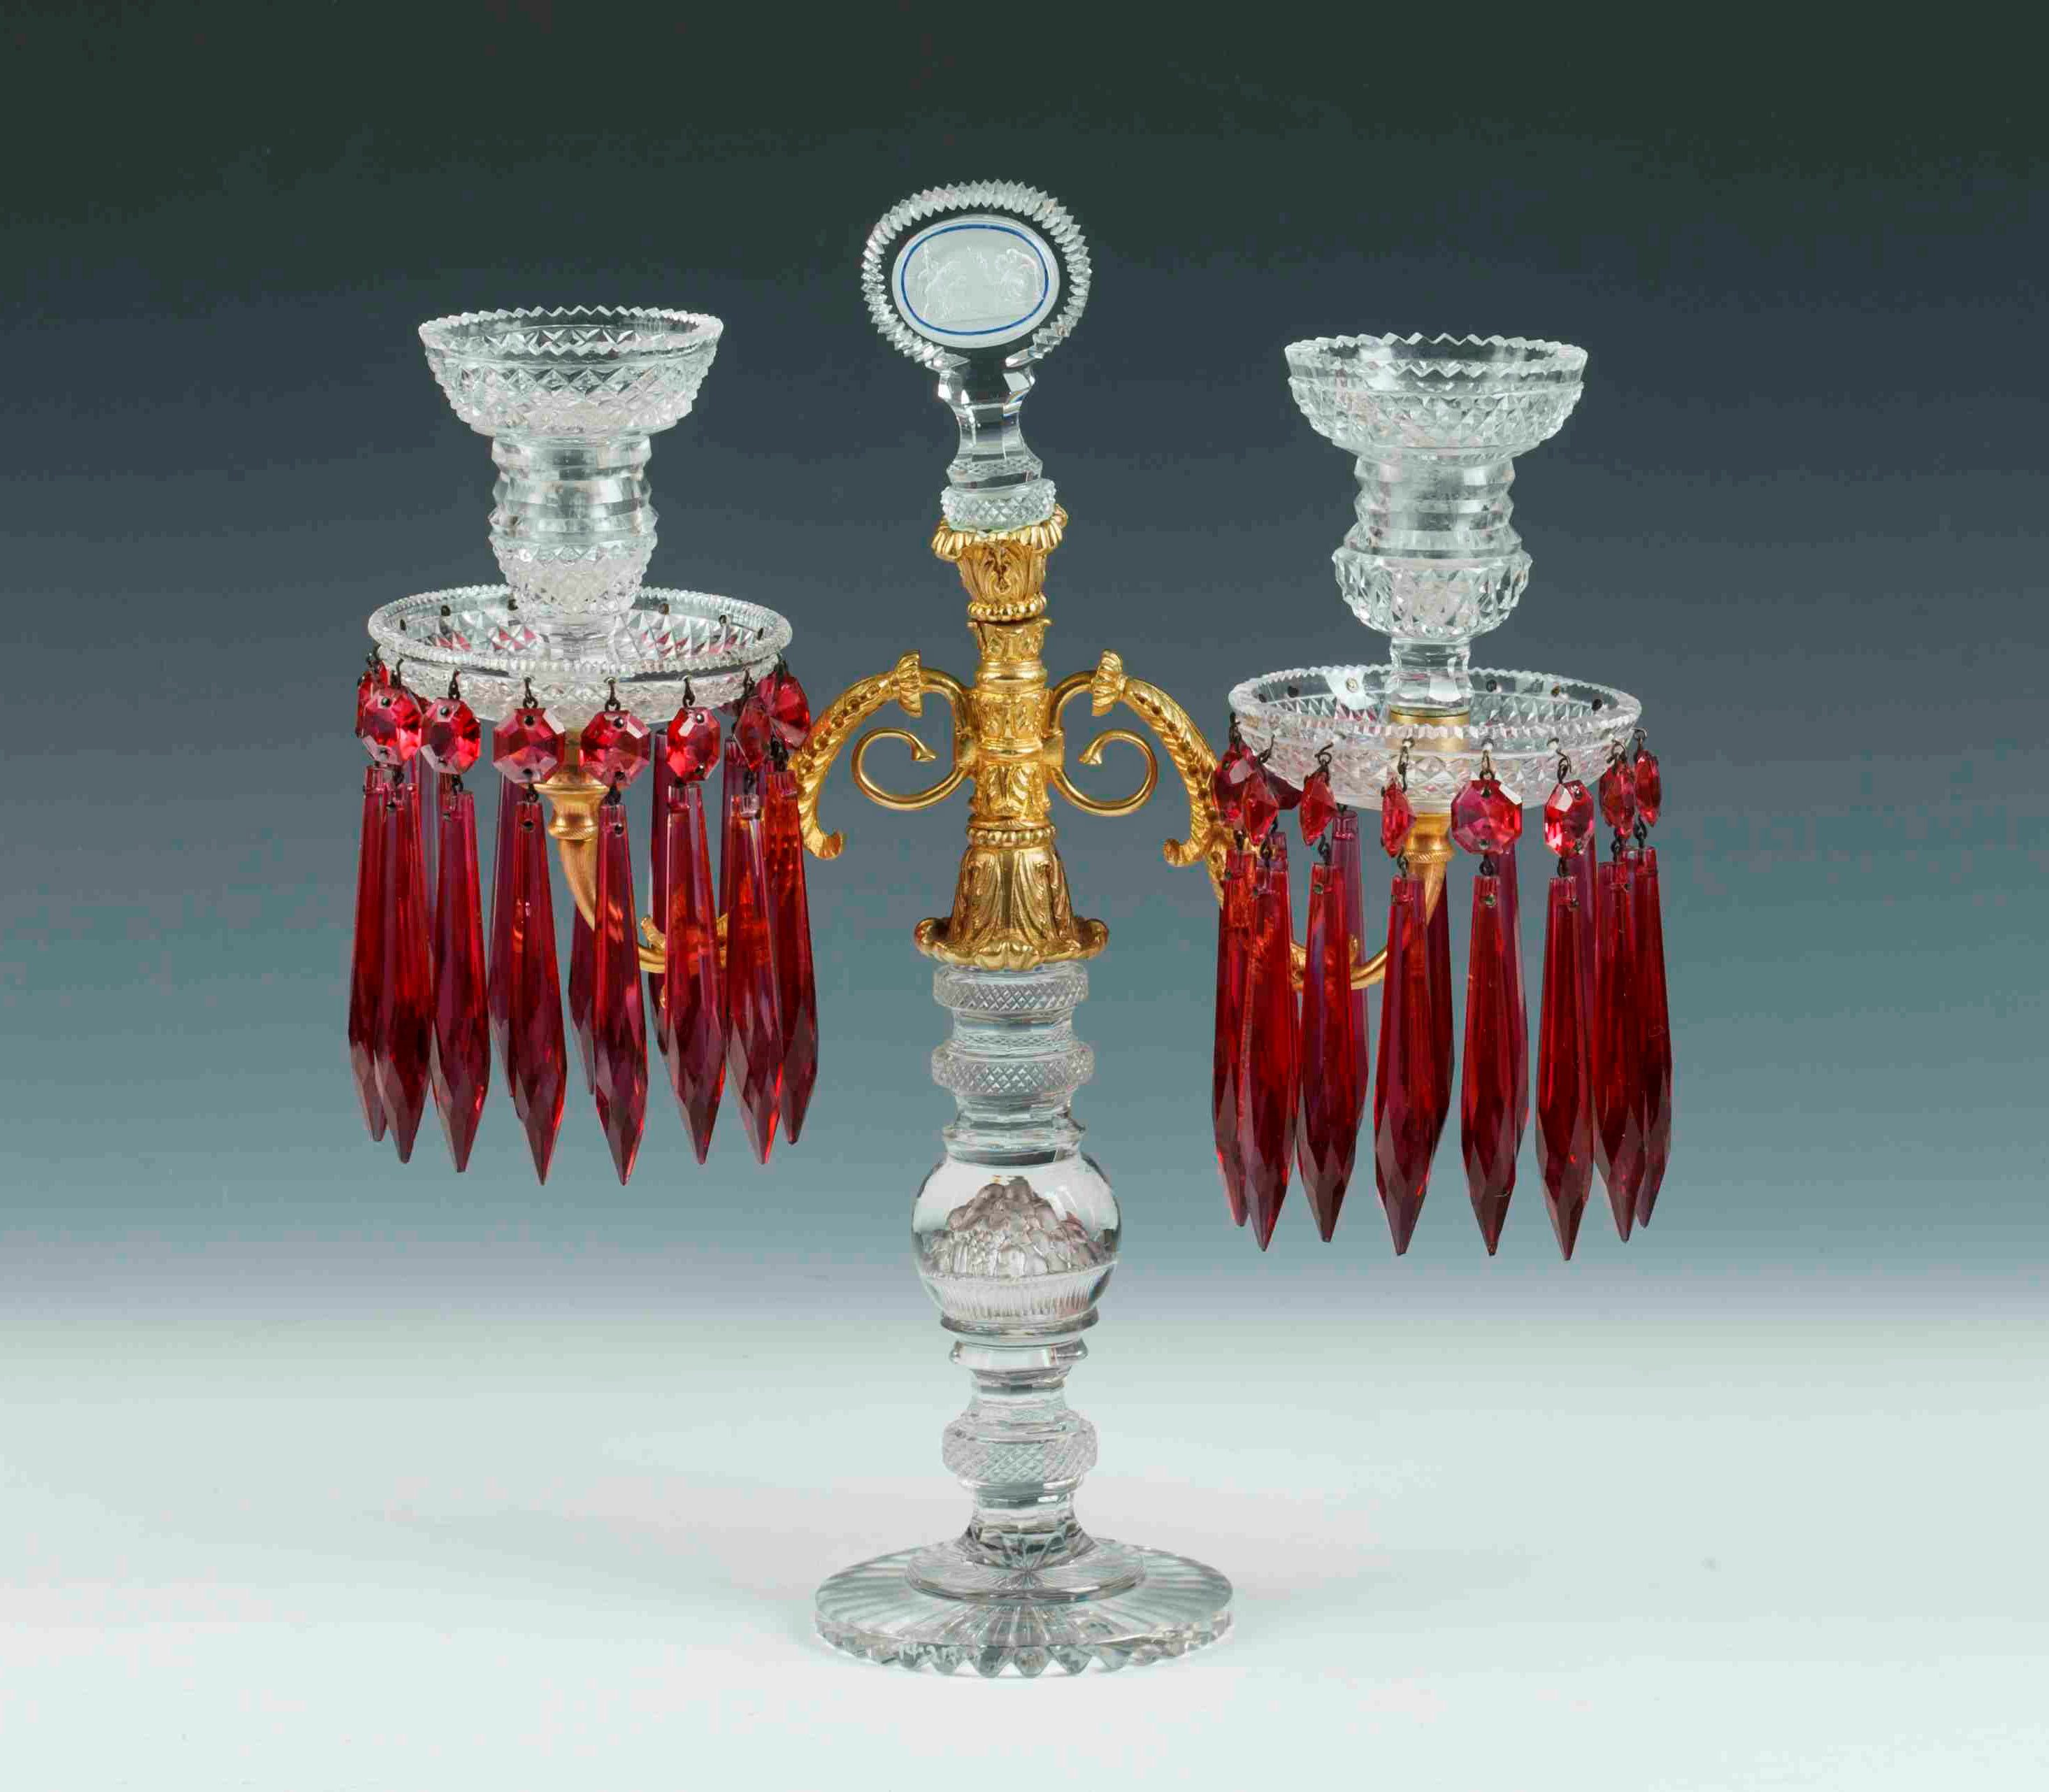 Picture of a glass piece from Hillwood's collection.